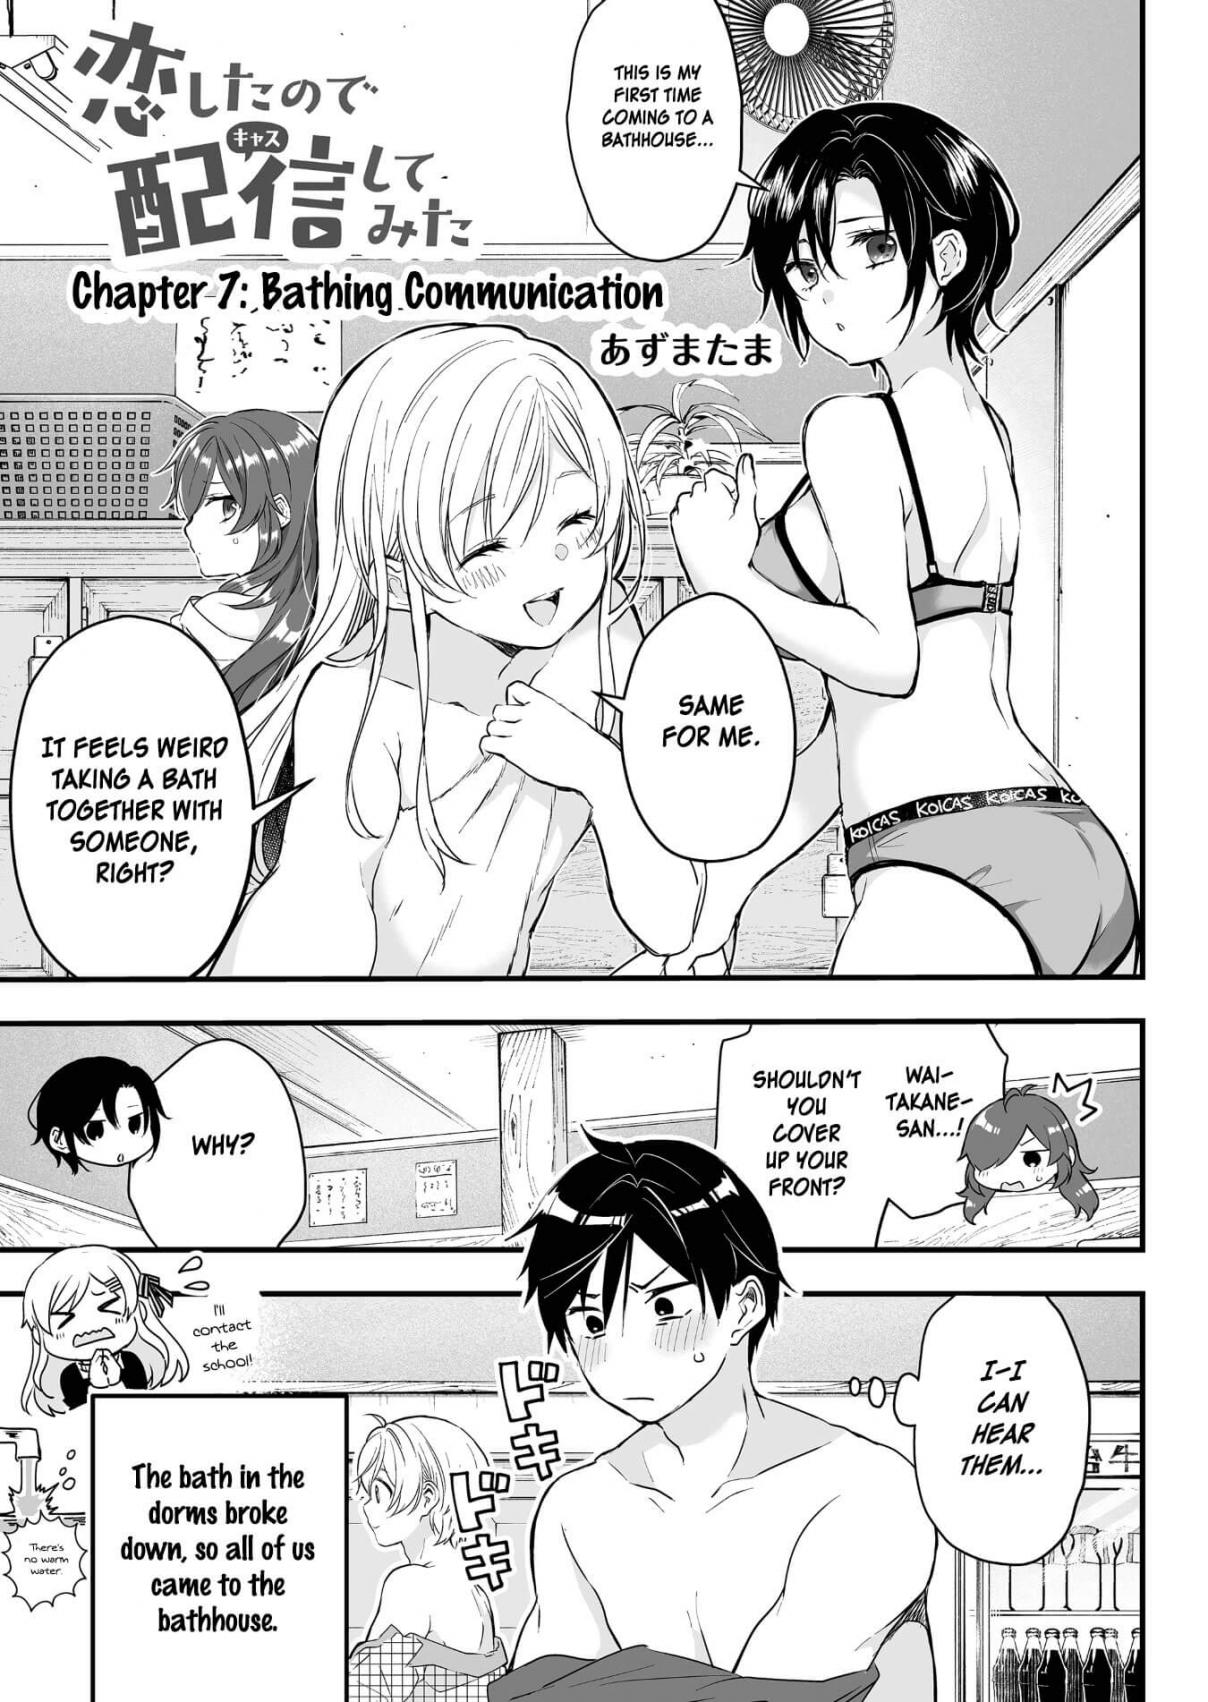 I Fell in Love, so I Tried Livestreaming. Ch. 7 Bathing Communication